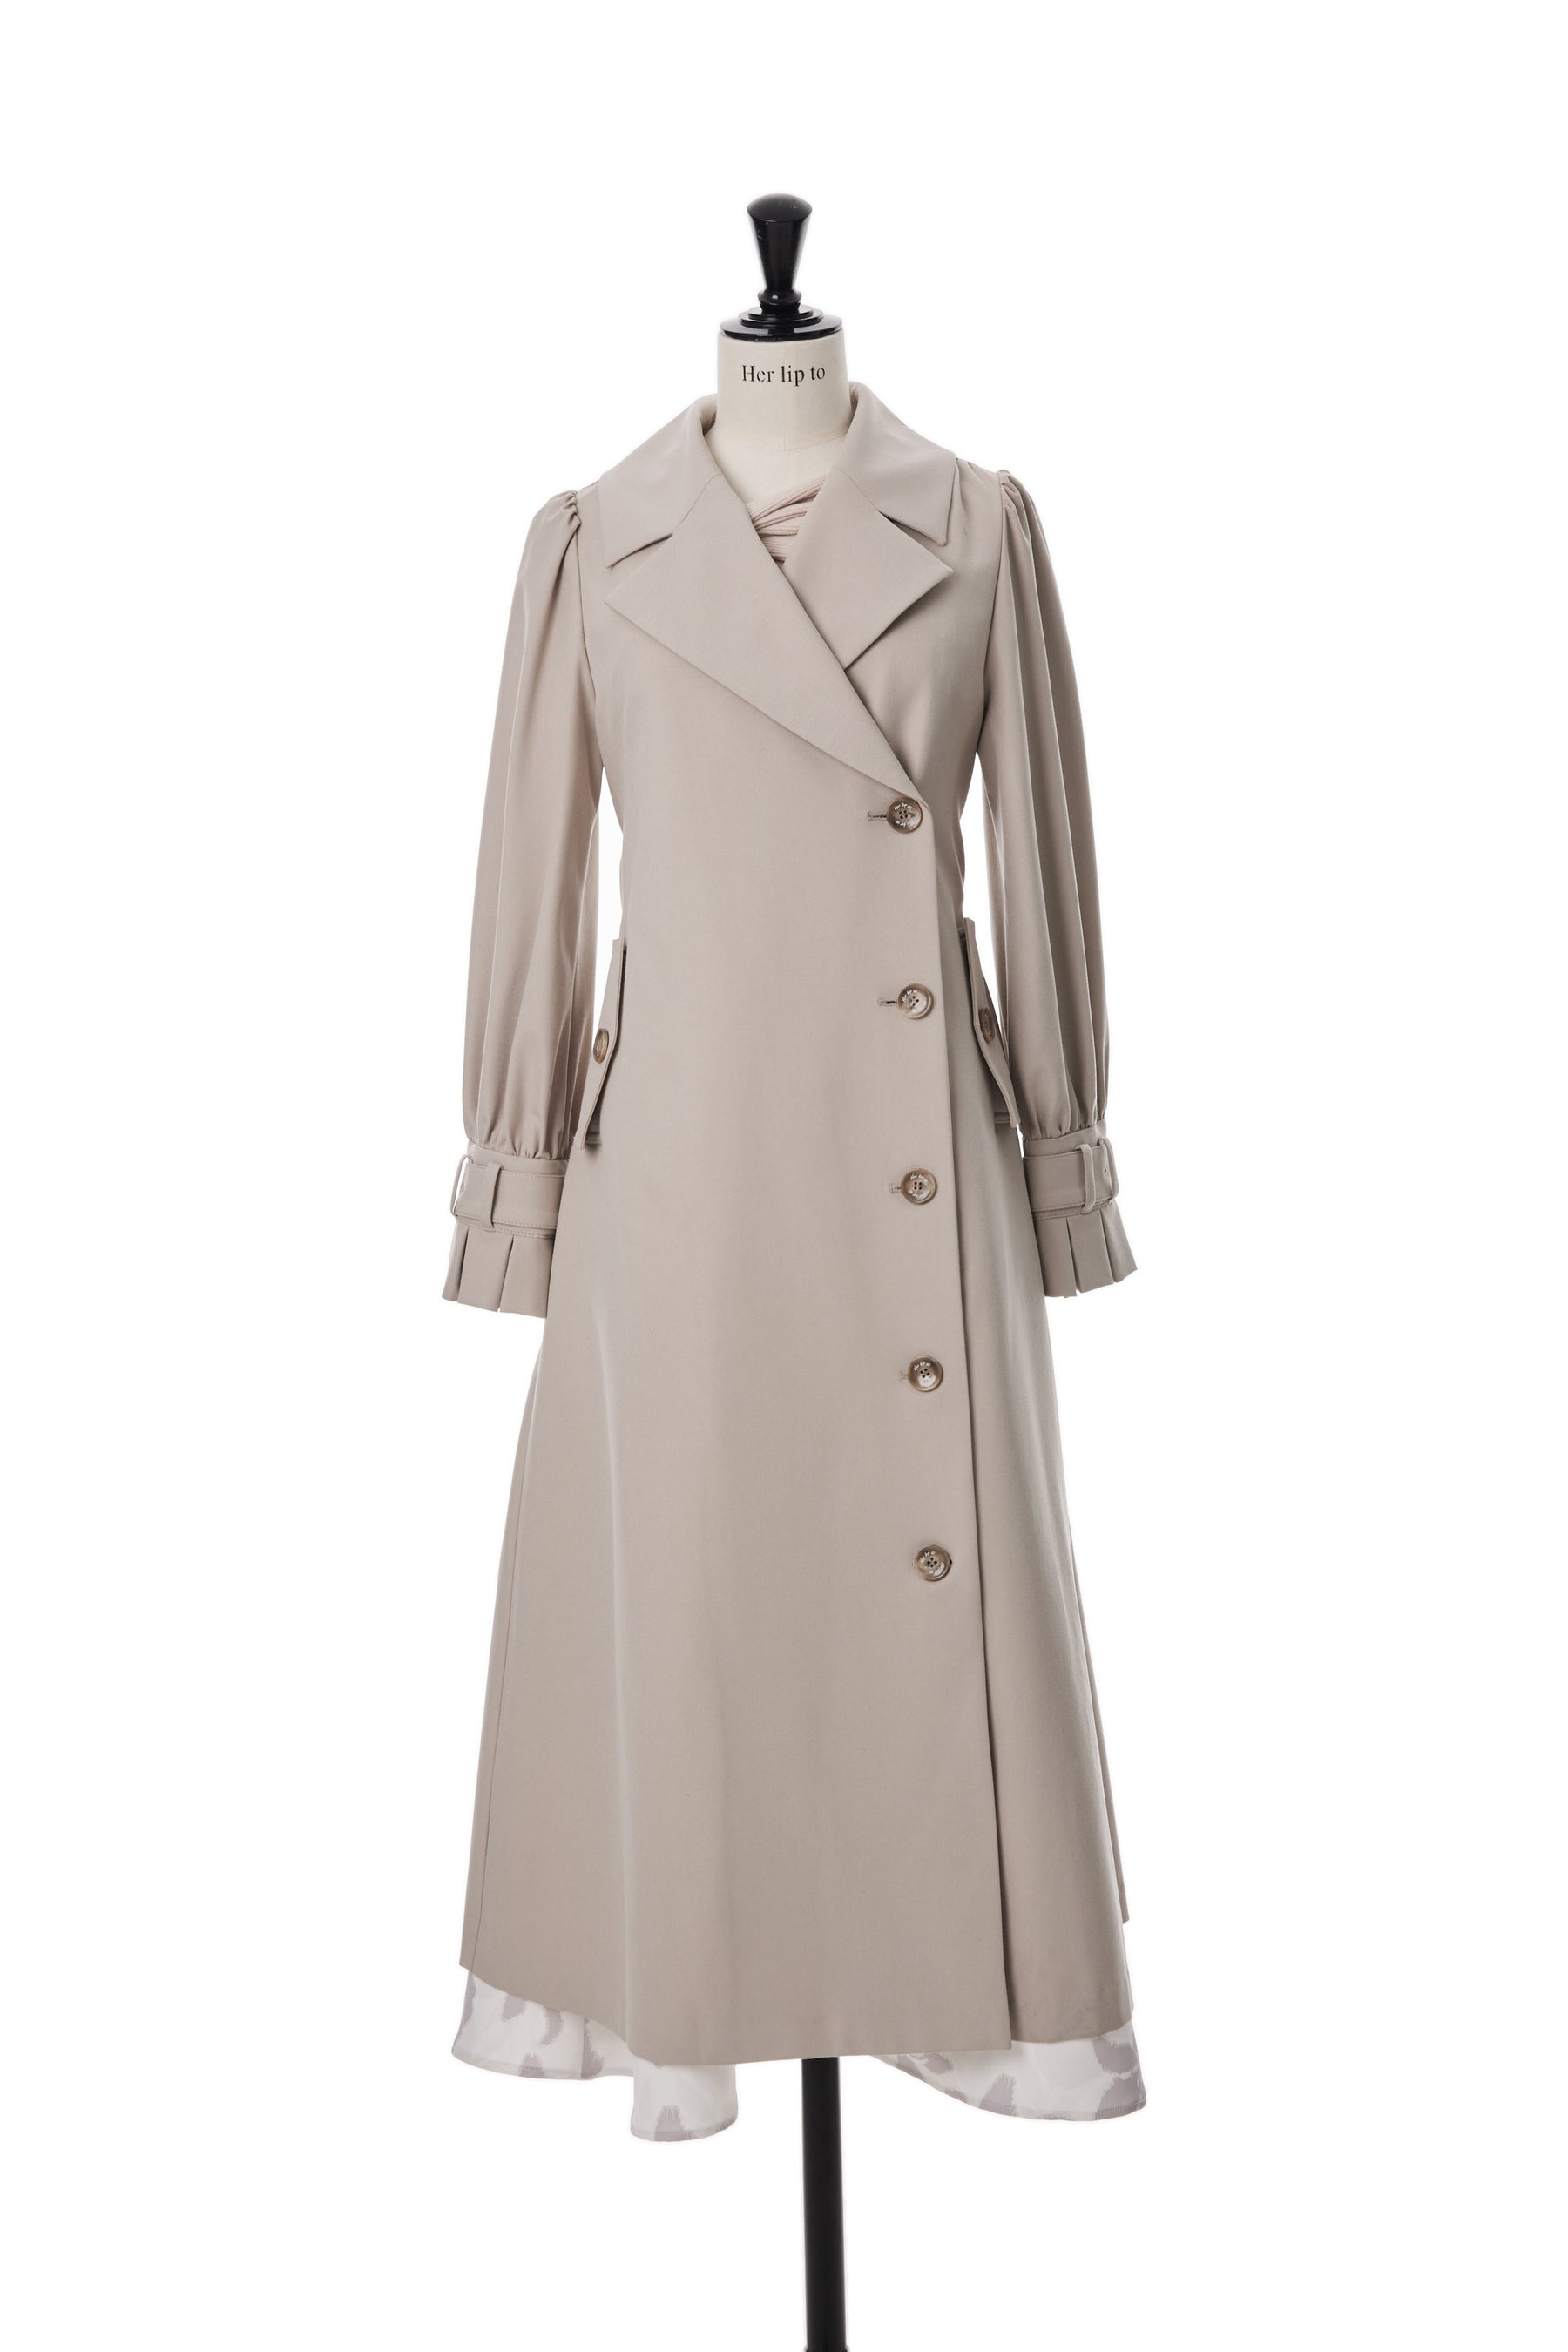 Her lip to♡Belted Dress Trench Coat新品未使用